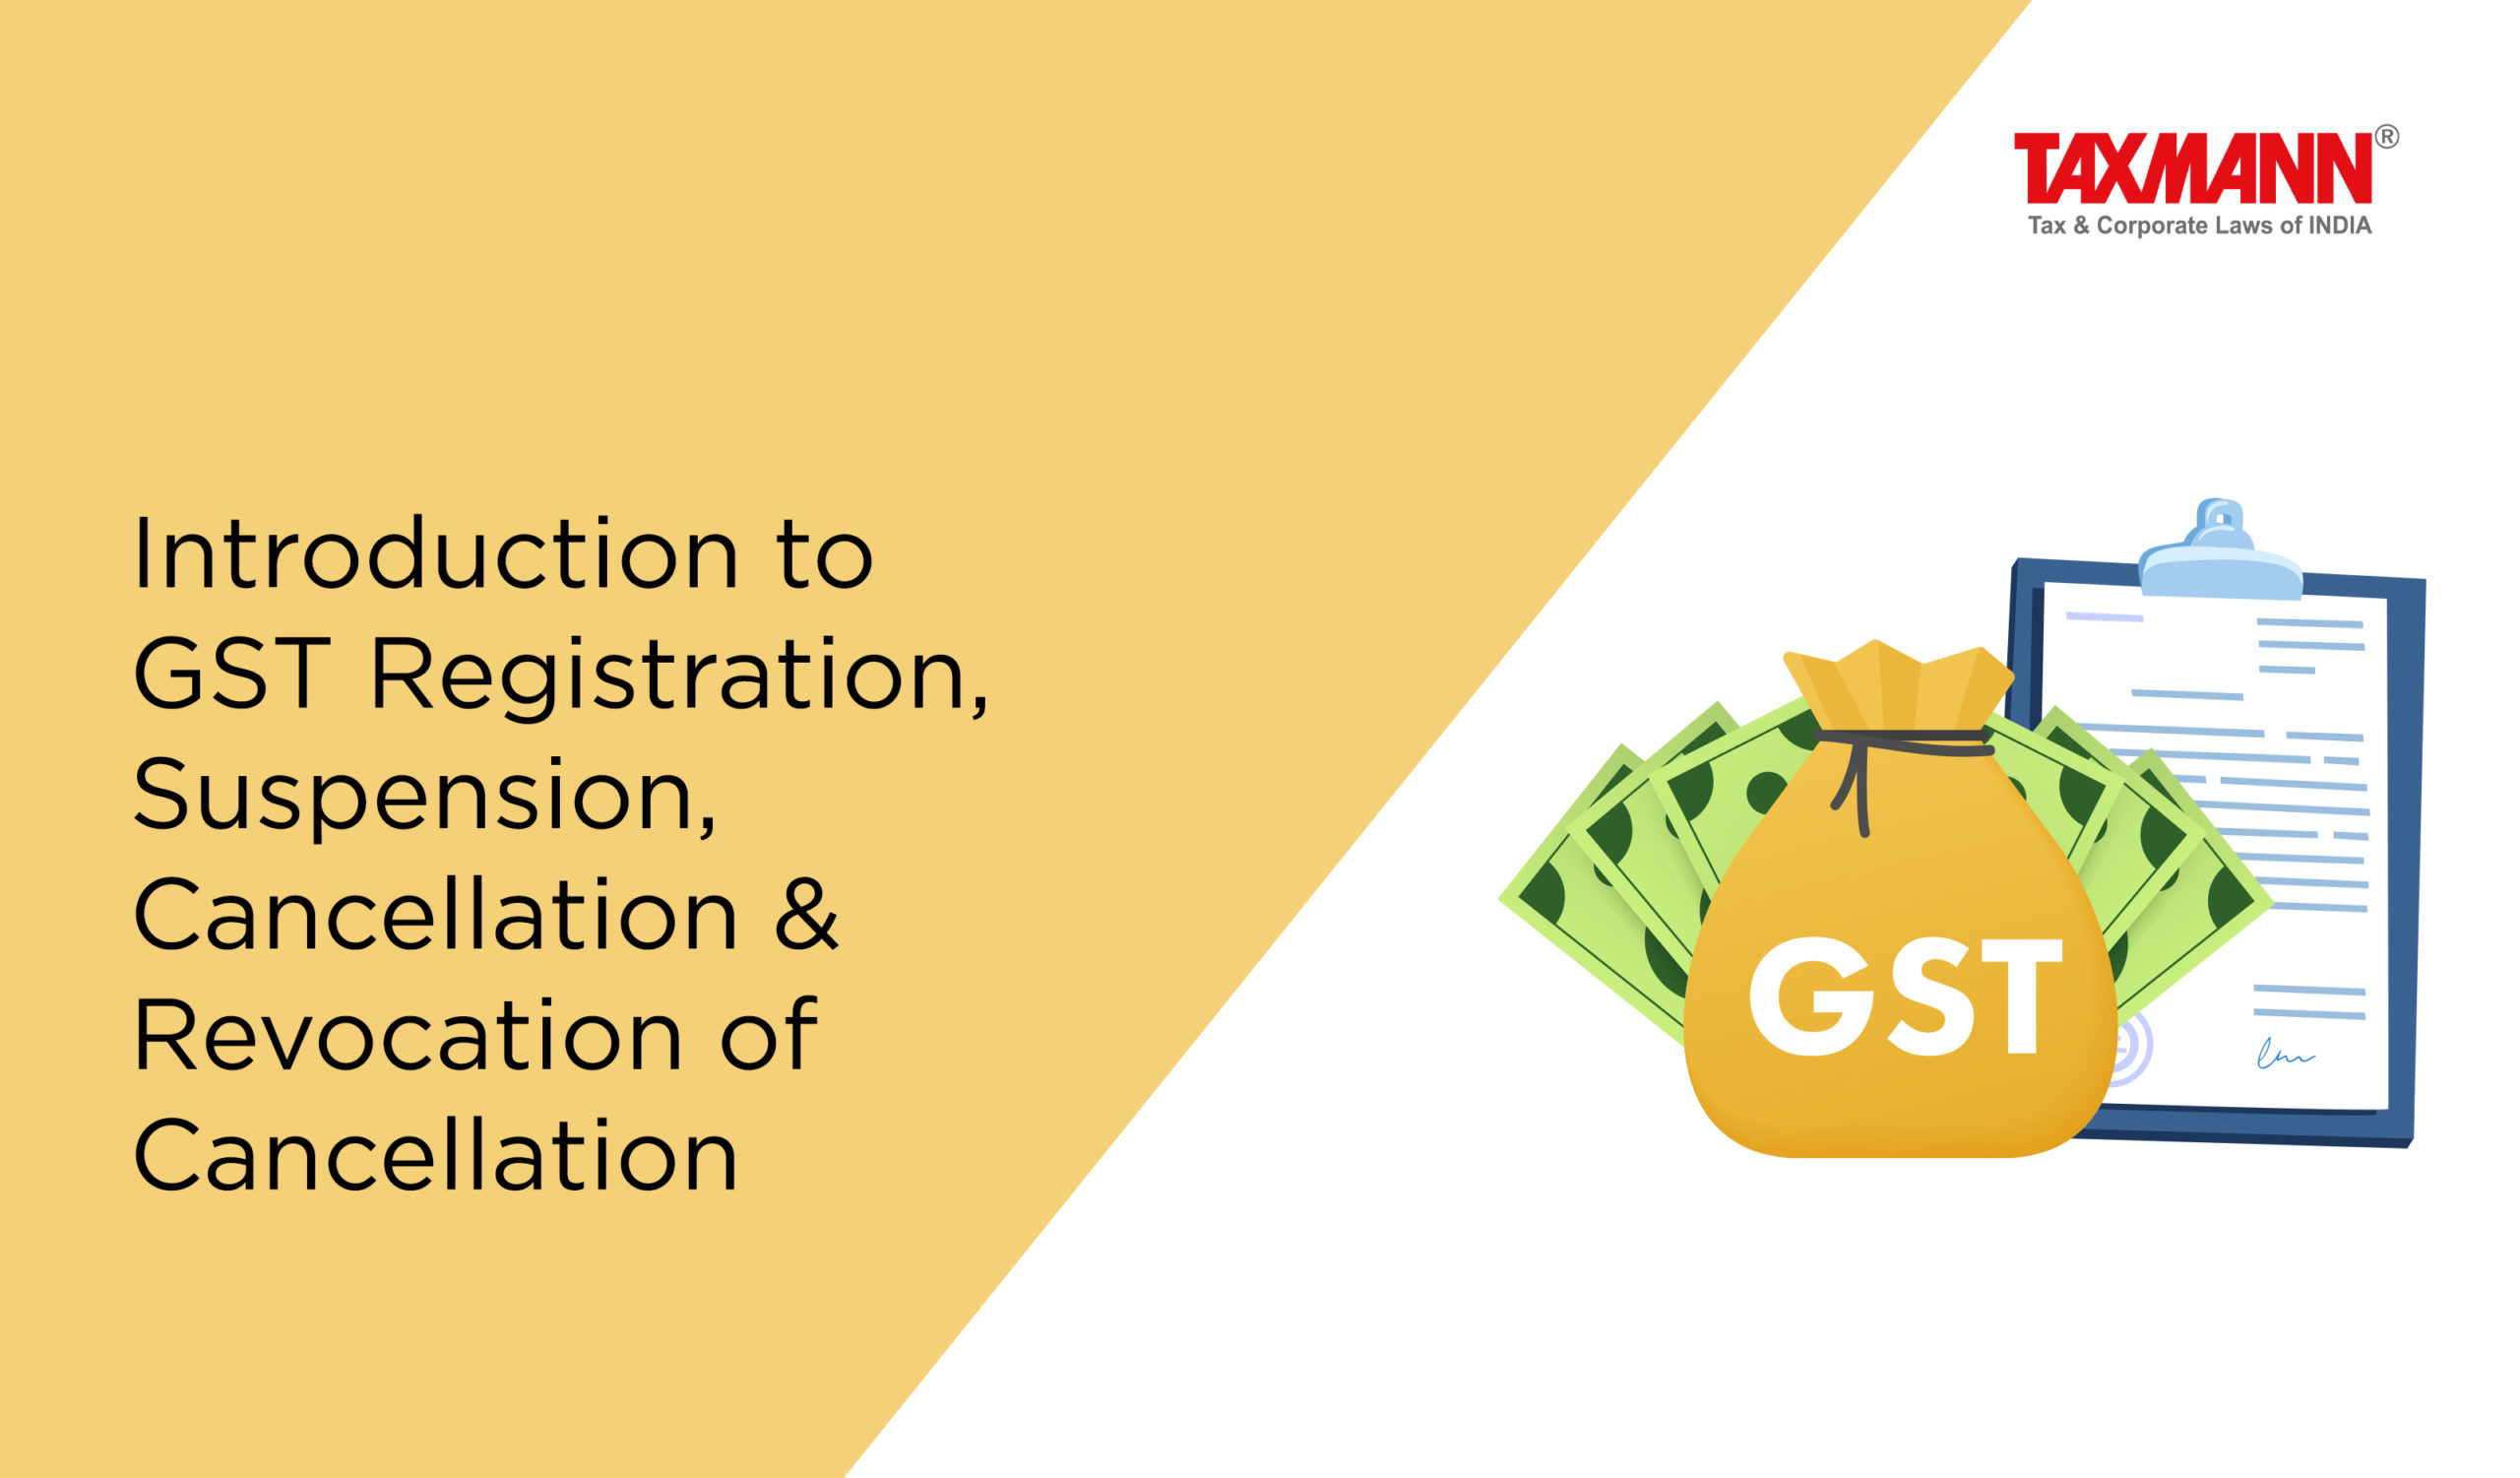 Registration under the GST Law